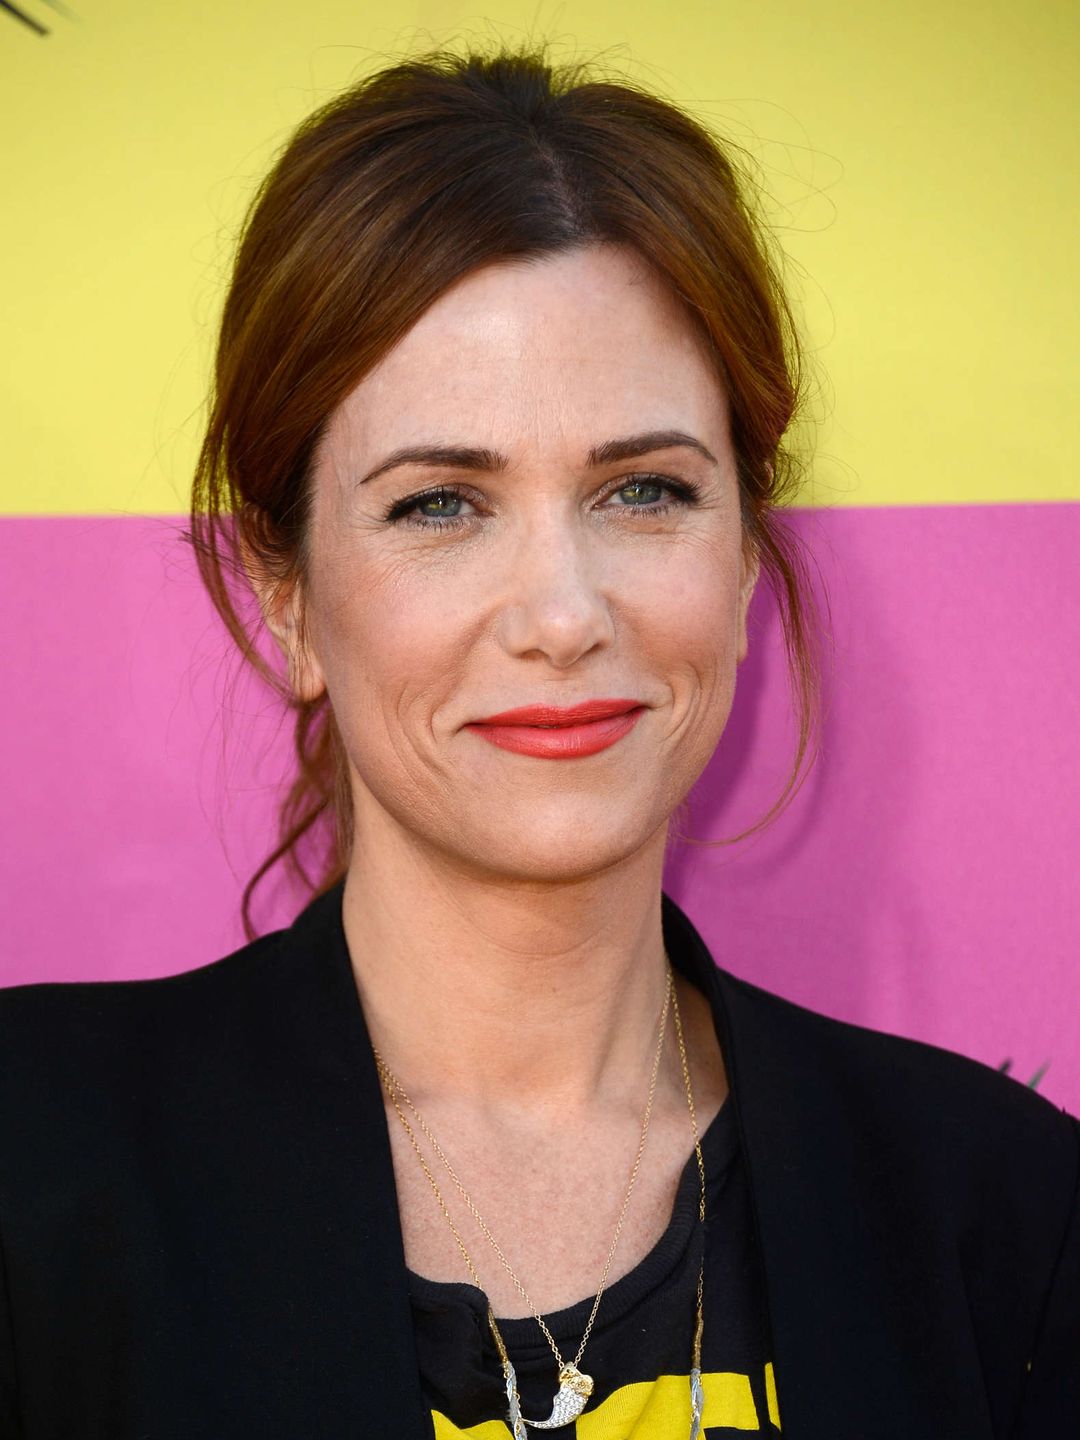 Kristen Wiig does she have a husband